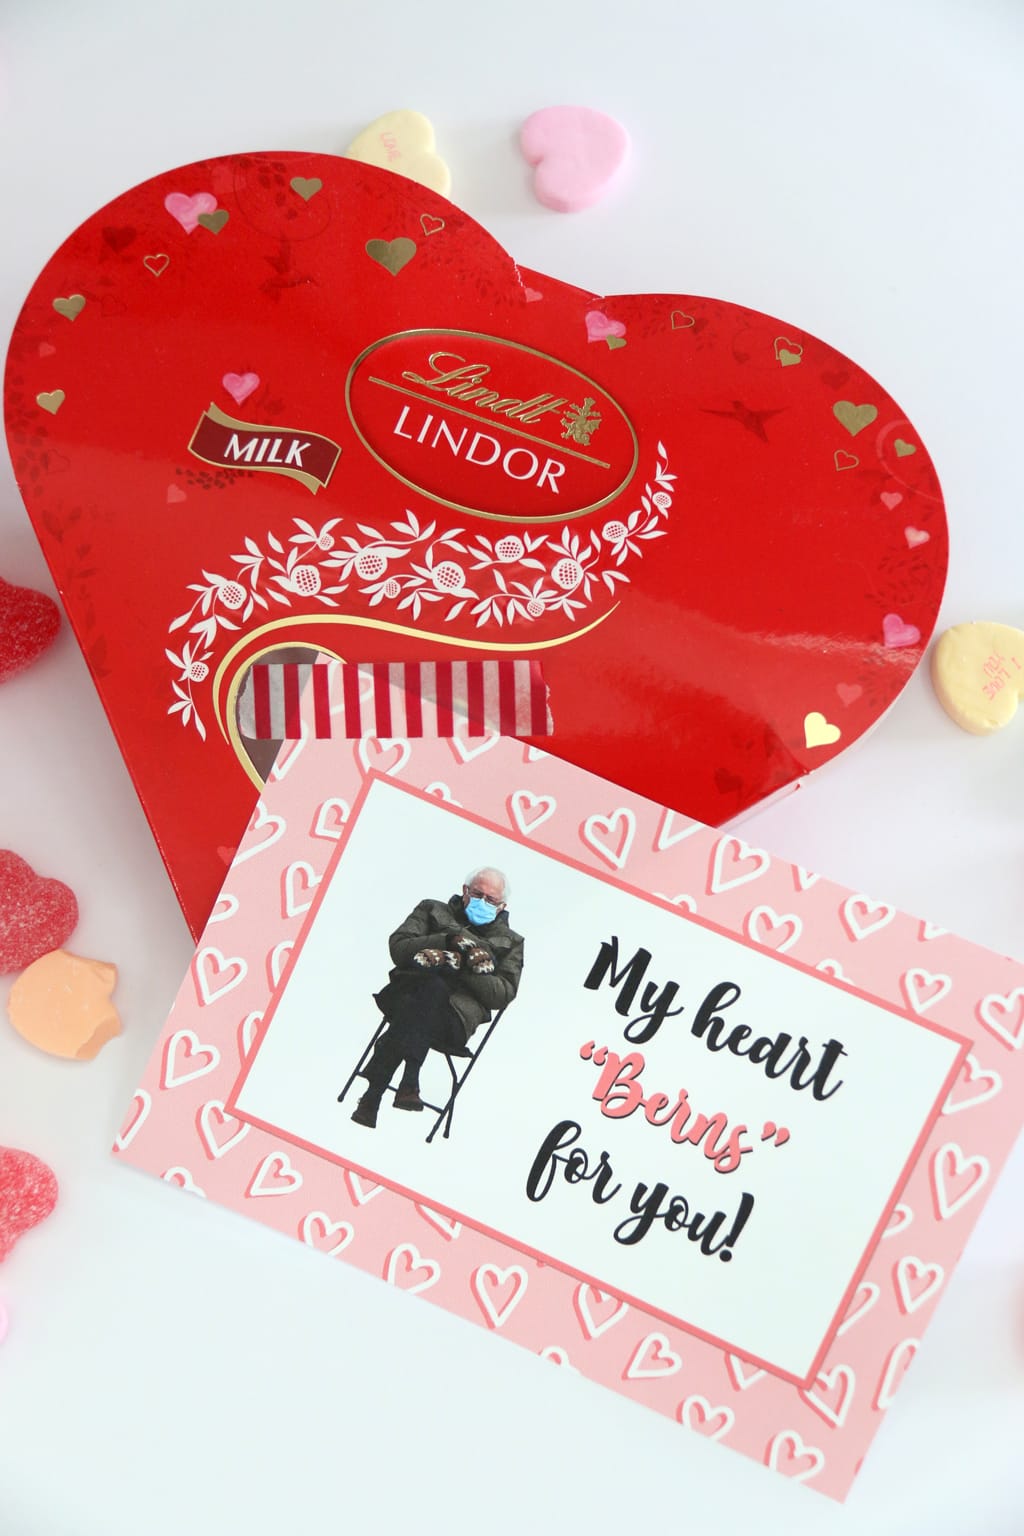 My Heart "Berns" for you Free Valentine Gift Tag taped to Lindt Lindor Chocolates